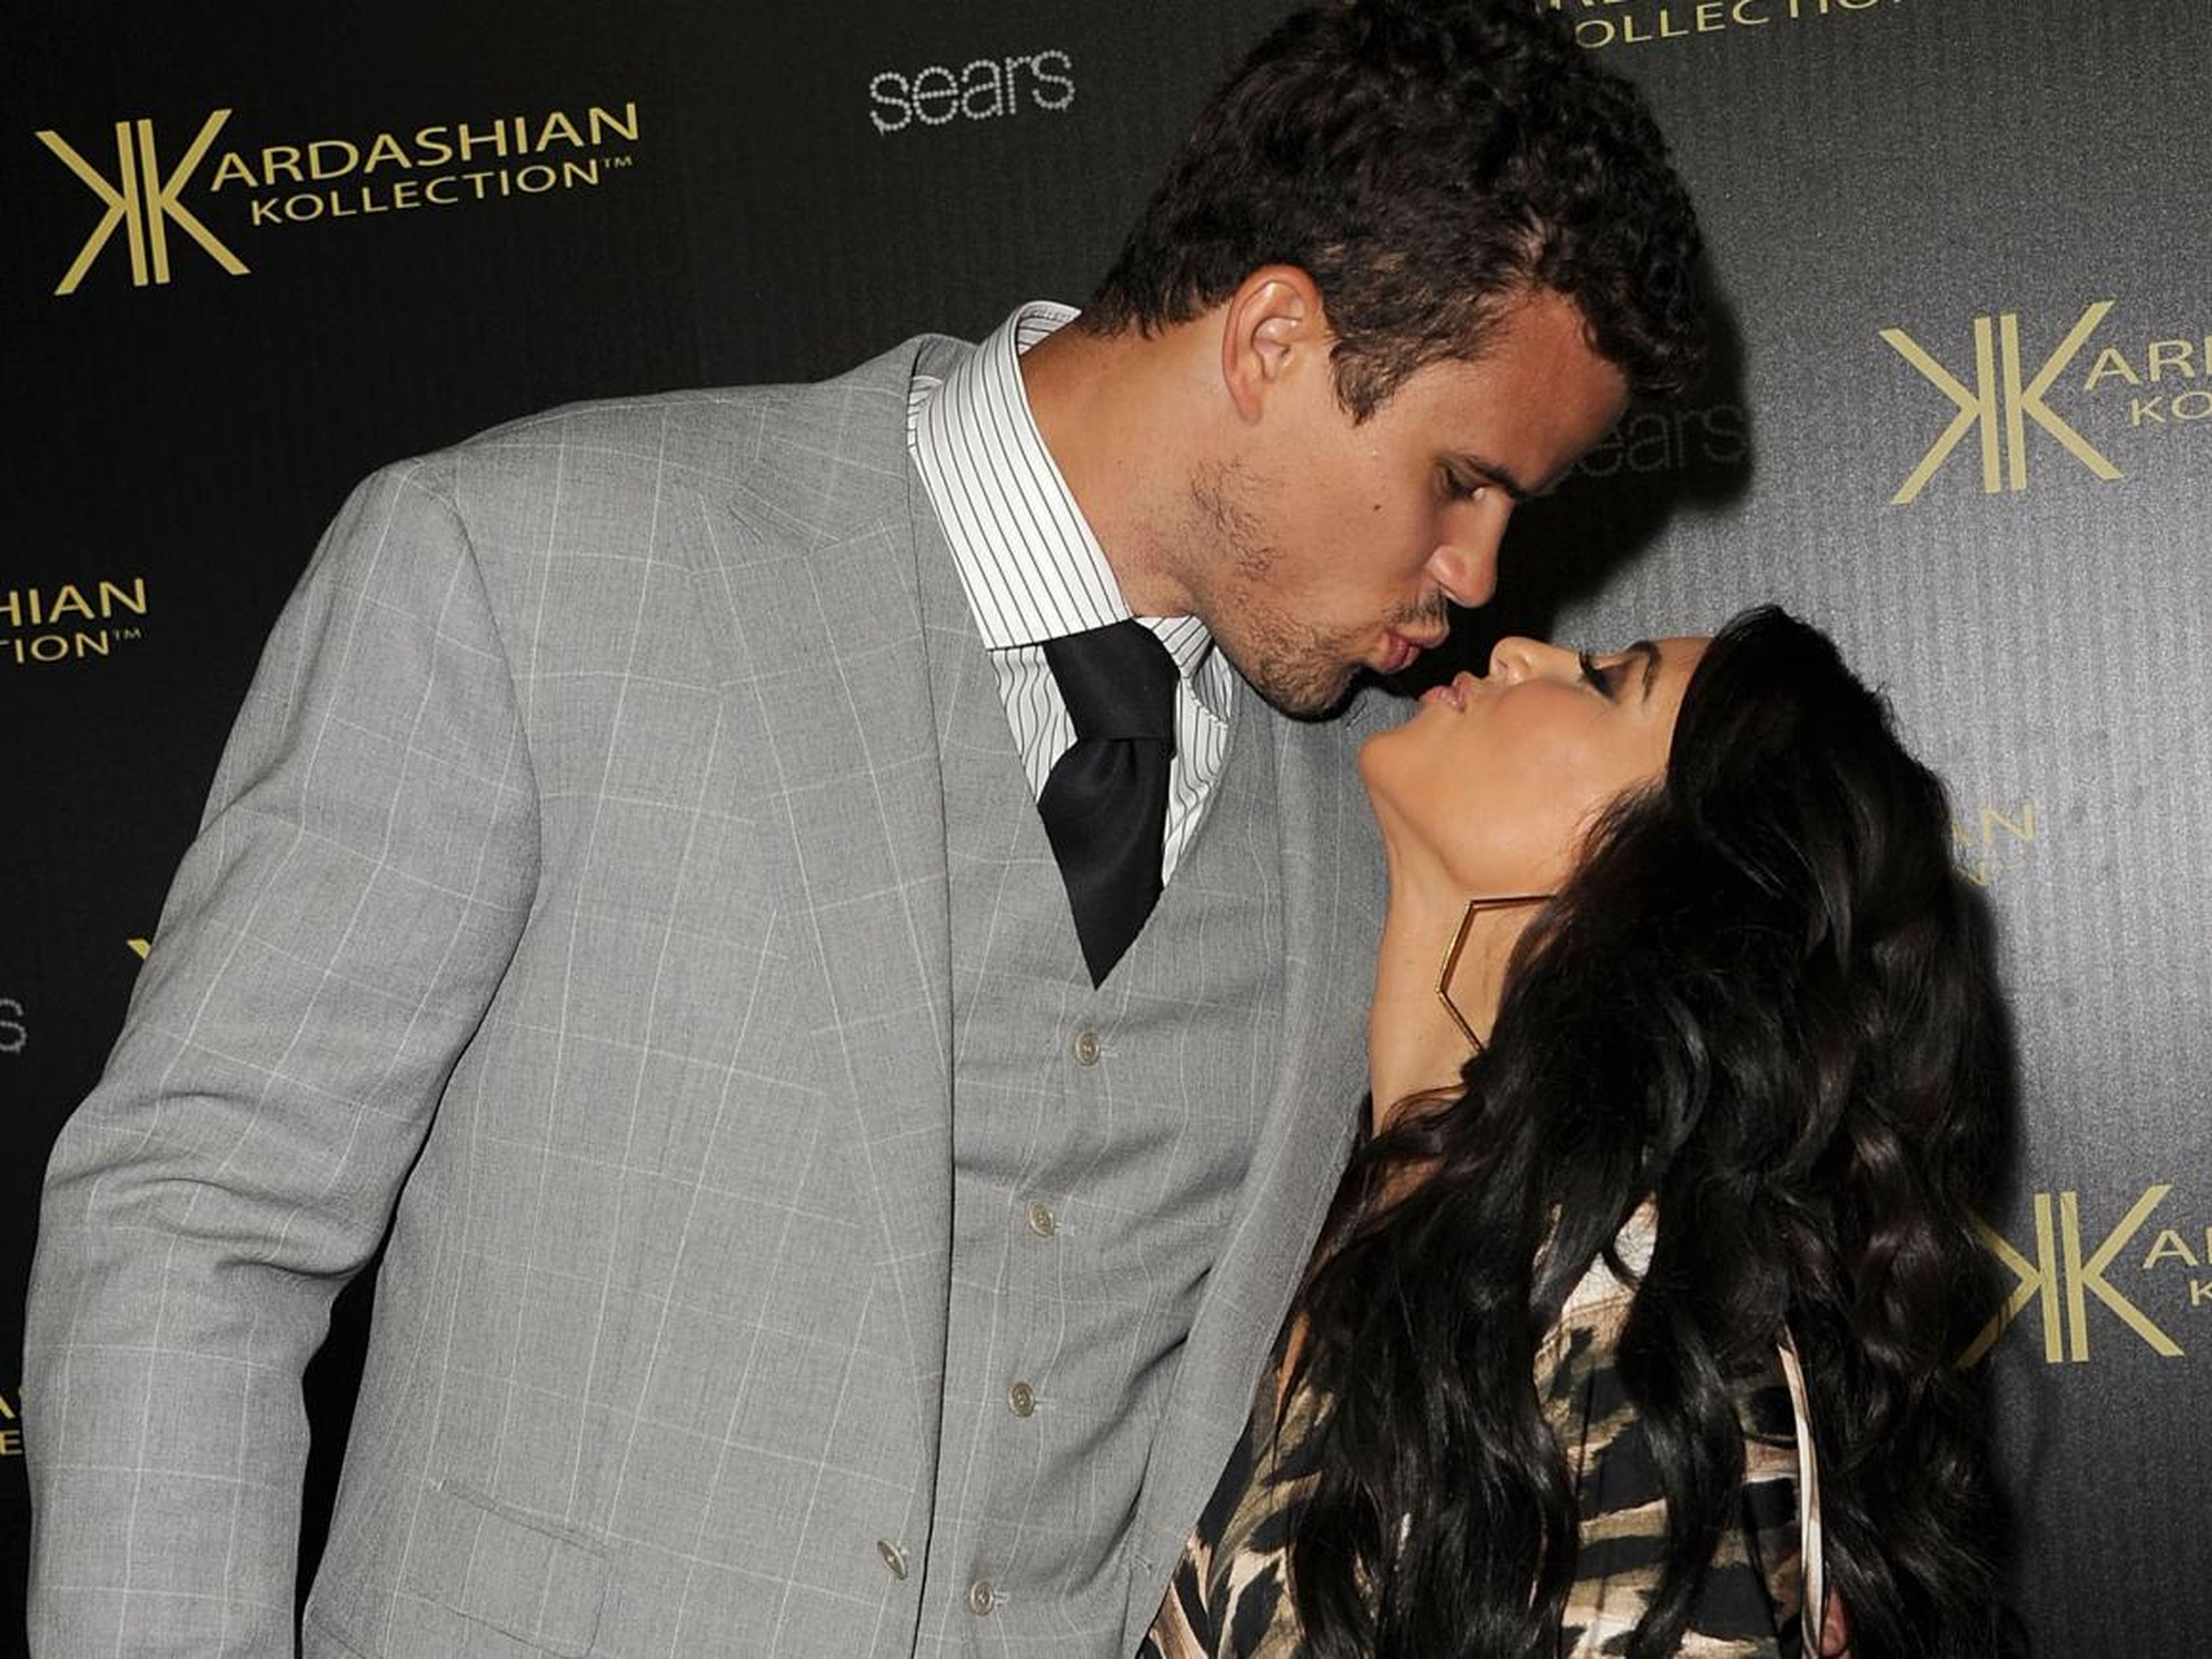 At the time, Kim was newly married to NBA player, Kris Humphries. The pair lived in a suite at the Gansevoort Hotel with Kourtney, her then-boyfriend Scott Disick, and their son Mason Disick.